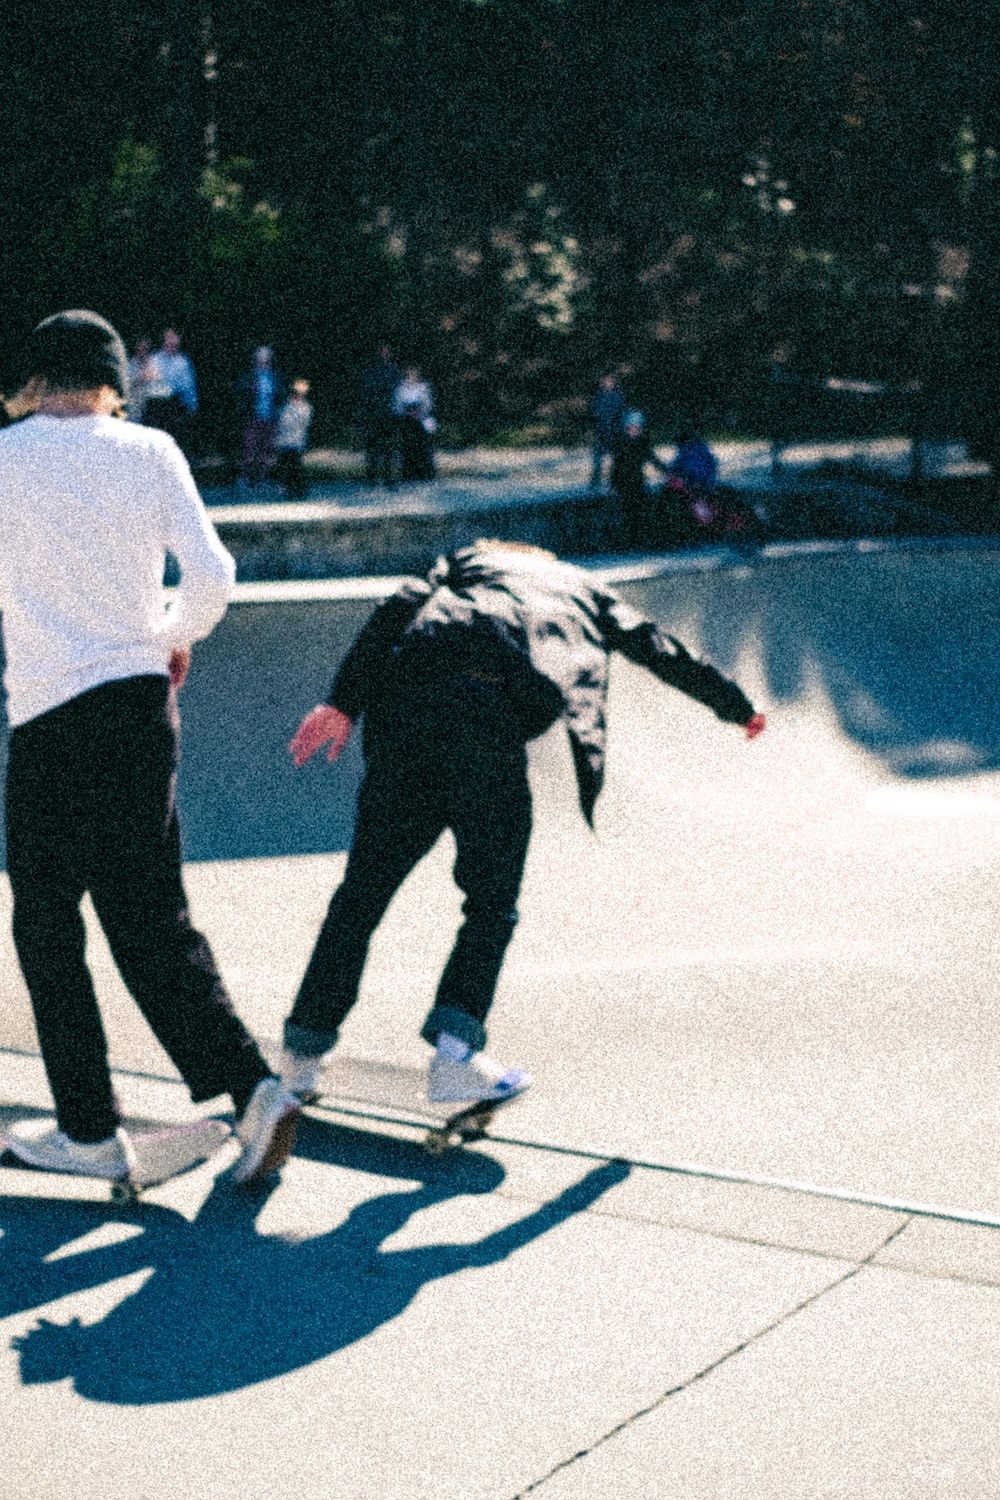 A couple of people riding skateboards at a skate park photo